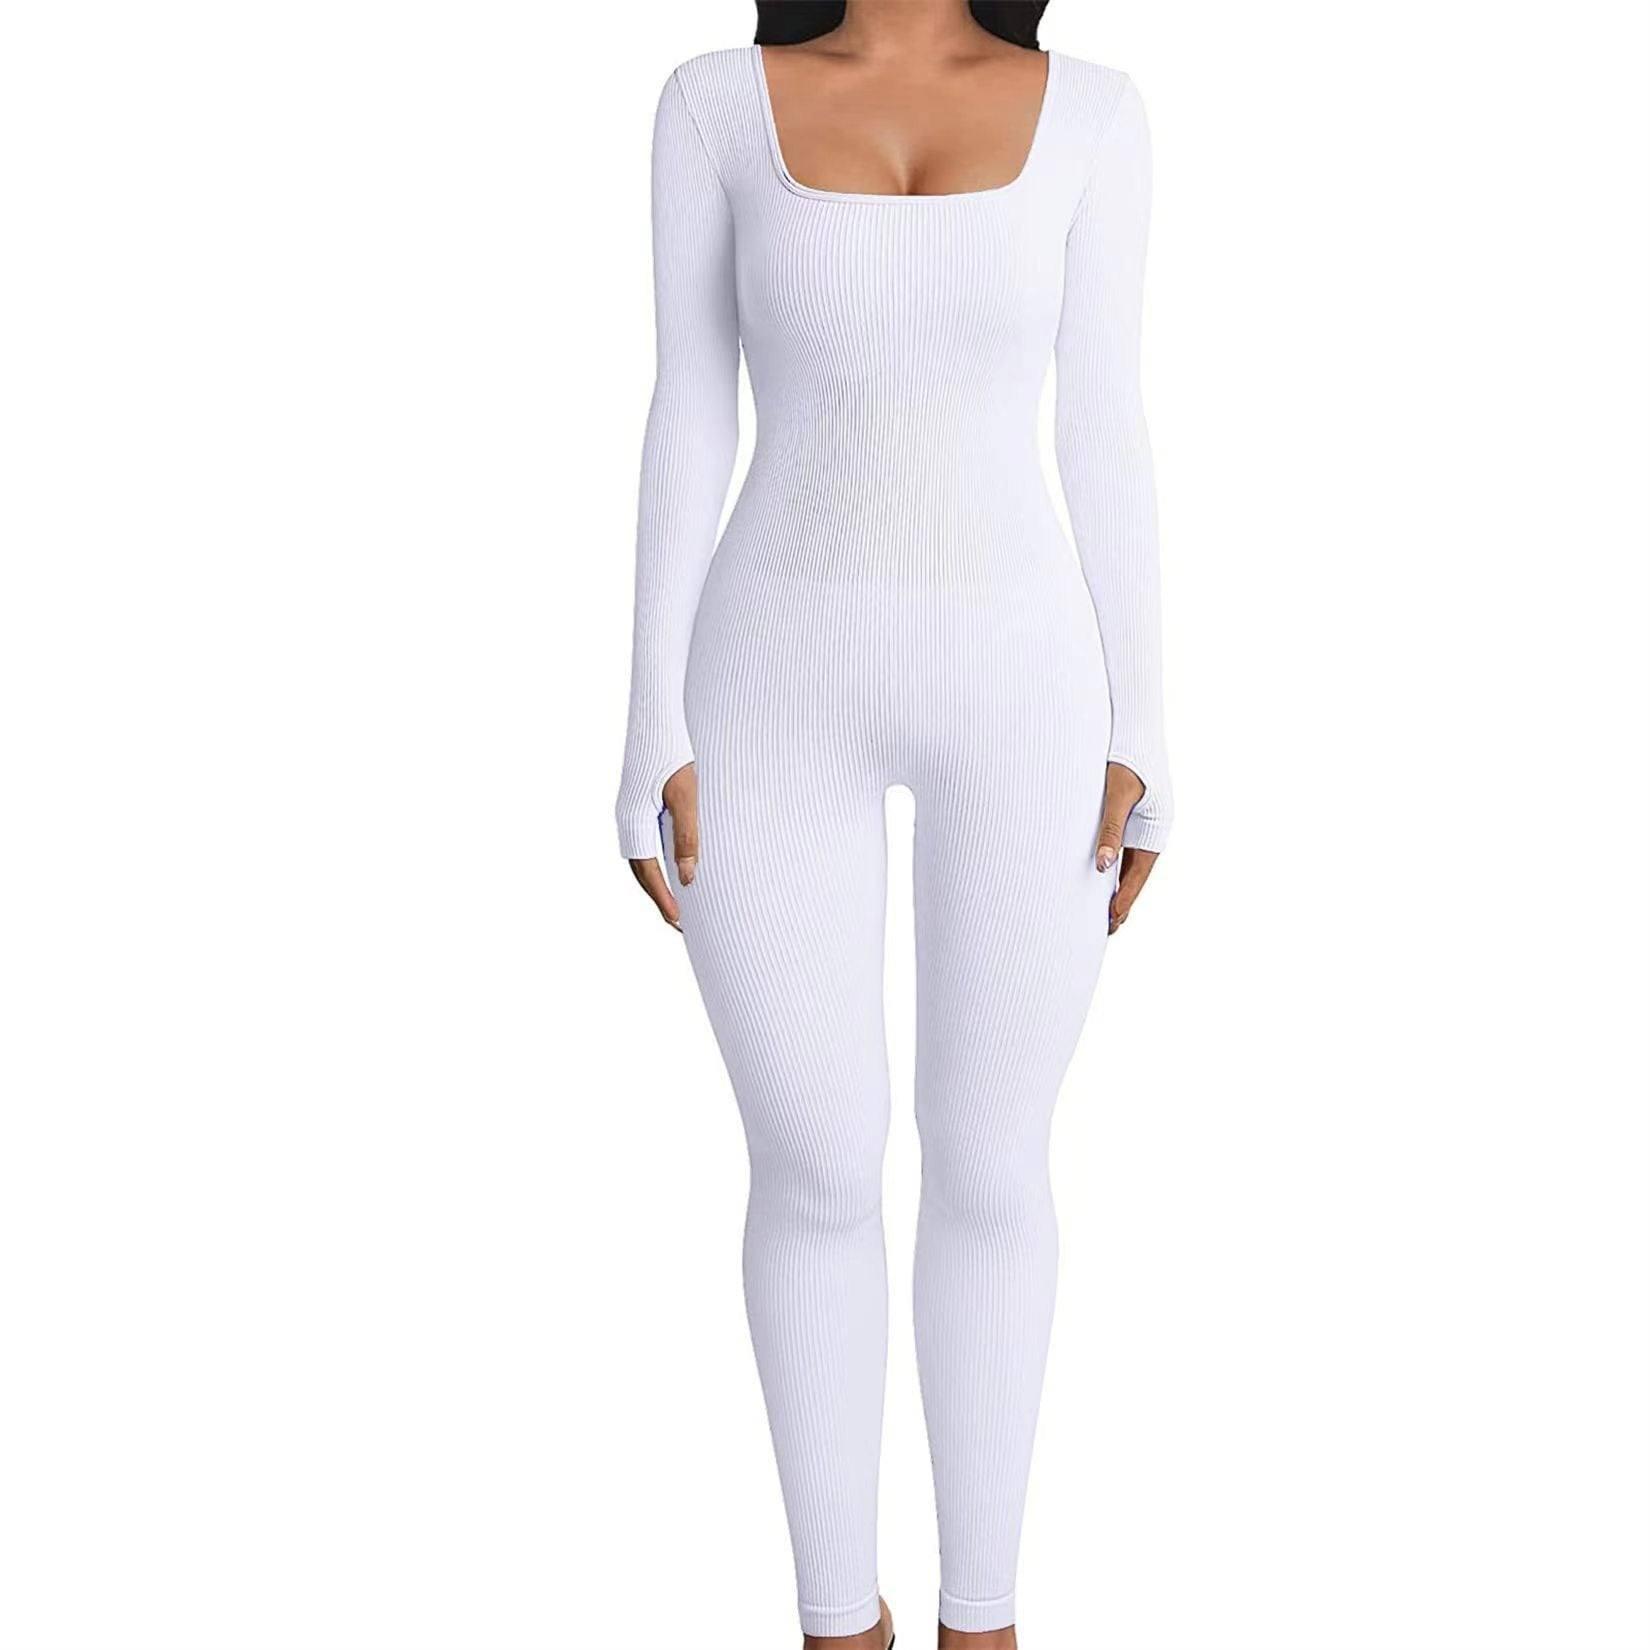 Square Neck And Buttocks Lifting Slim Fitting Jumpsuit-White-11